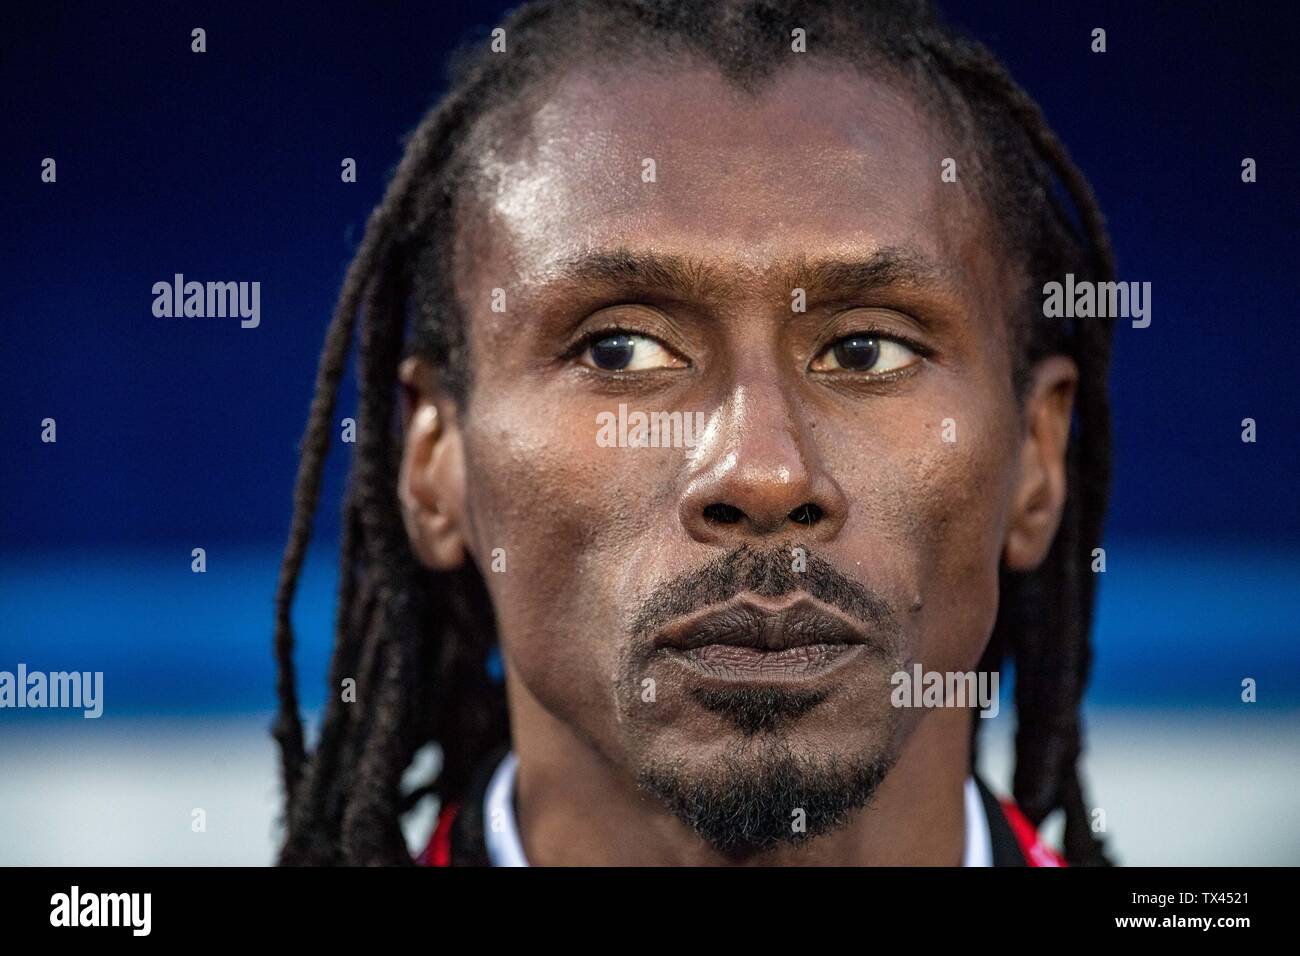 CAIRO, EGYPT - JUNE 23: coach Aliou Cisse of Senegal looks on during the 2019 Africa Cup of Nations Group C match between Senegal and Tanzania at 30 June Stadium on June 23, 2019 in Cairo, Egypt. (Sebastian Frej/MB Media) Stock Photo